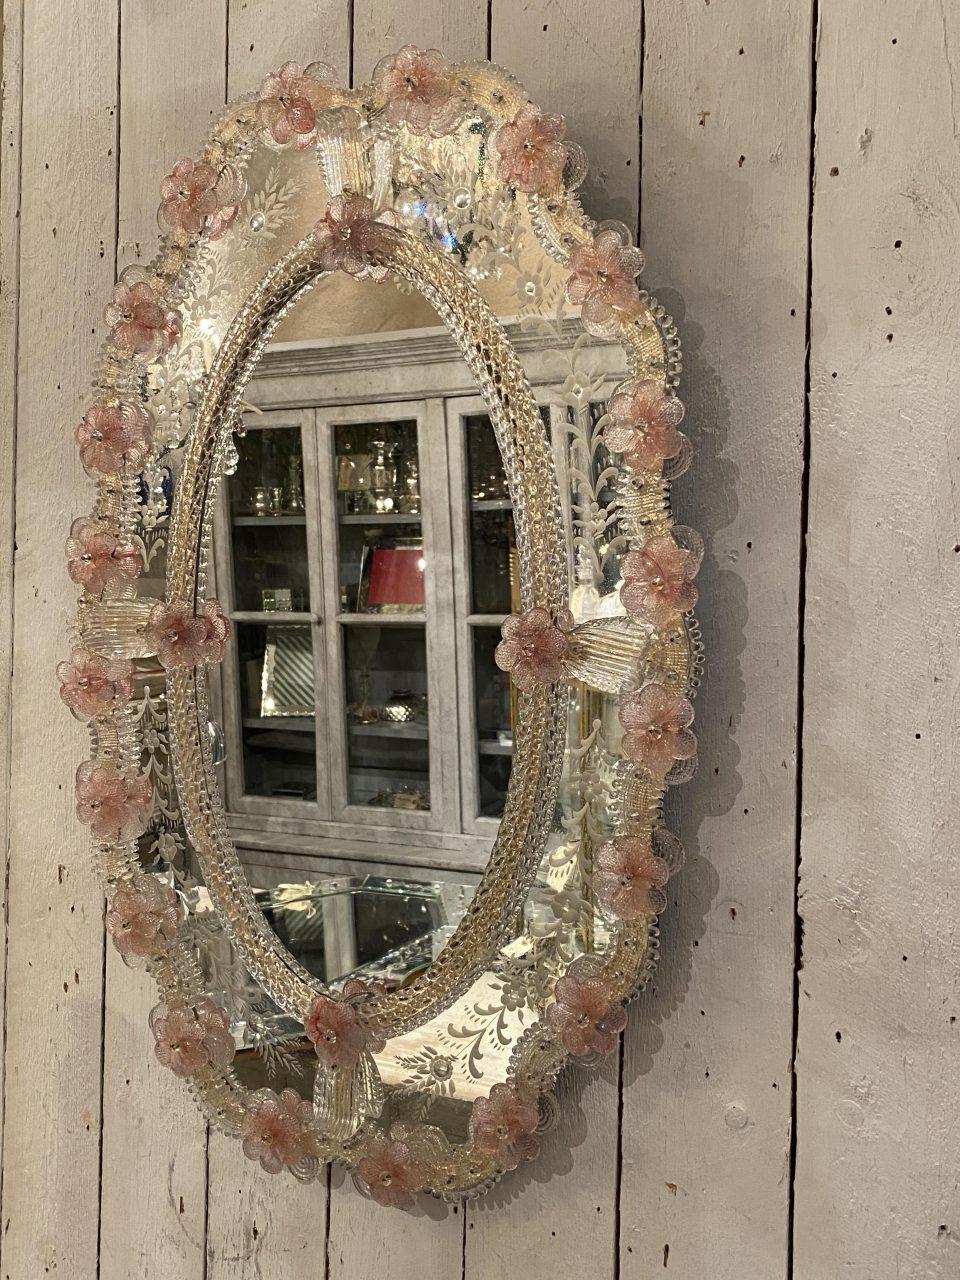 Exquisite, dreamy, delicate and feminine oval wall mirror, in Venetian style, circa 1920s-40s France.

A sophisticated frame in Venetian glass and with small adorable clear glass ornaments and pink glass flowers / rosettes along the frame. The